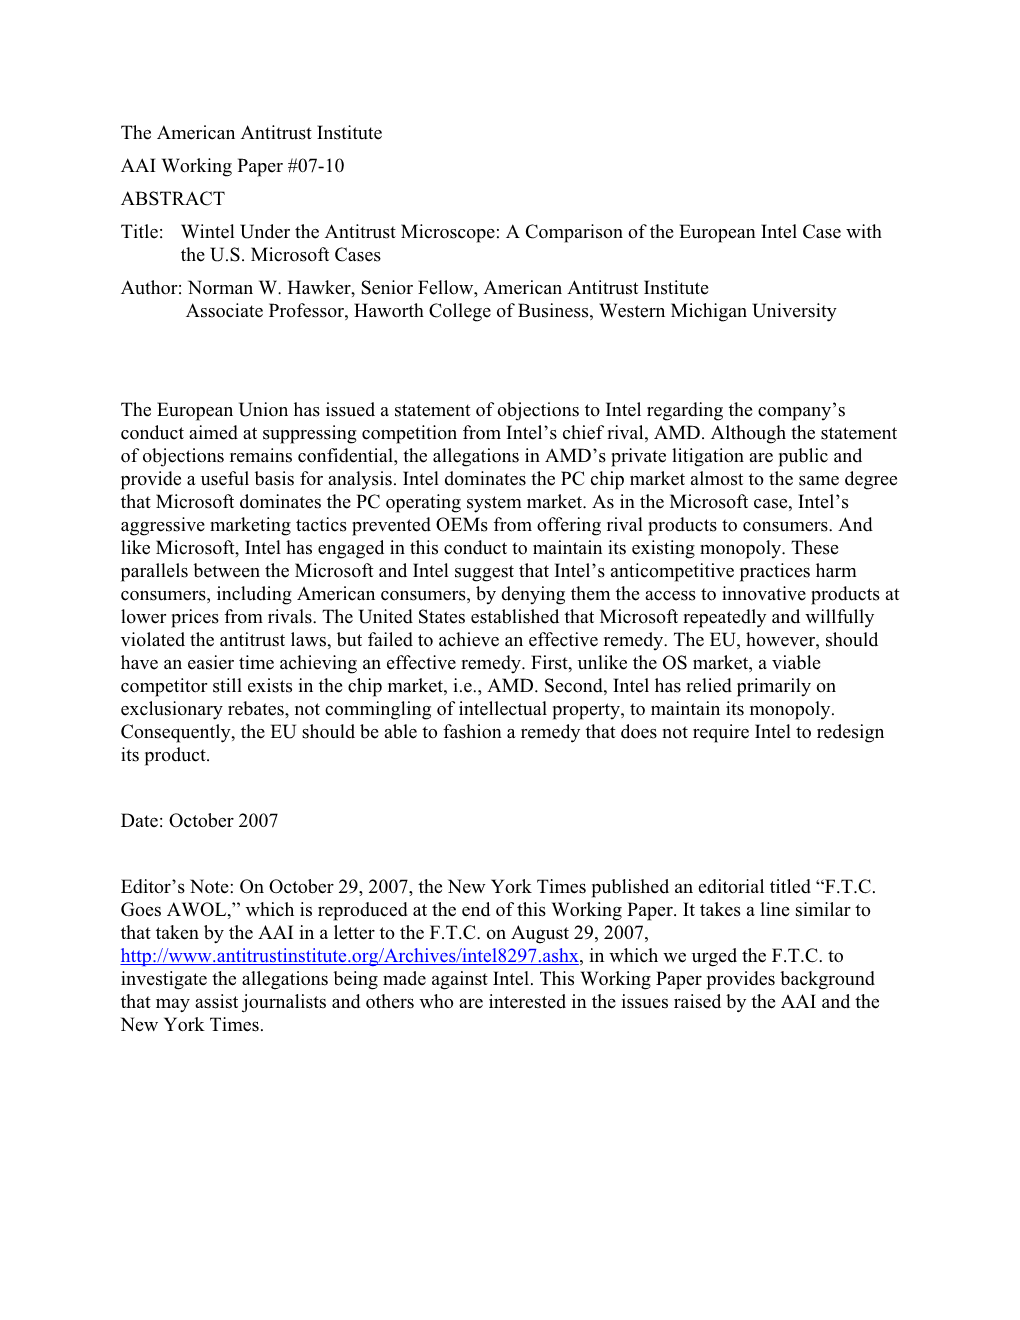 AAI Working Paper #07-10 ABSTRACT Title: Wintel Under the Antitrust Microscope: a Comparison of the European Intel Case with the U.S